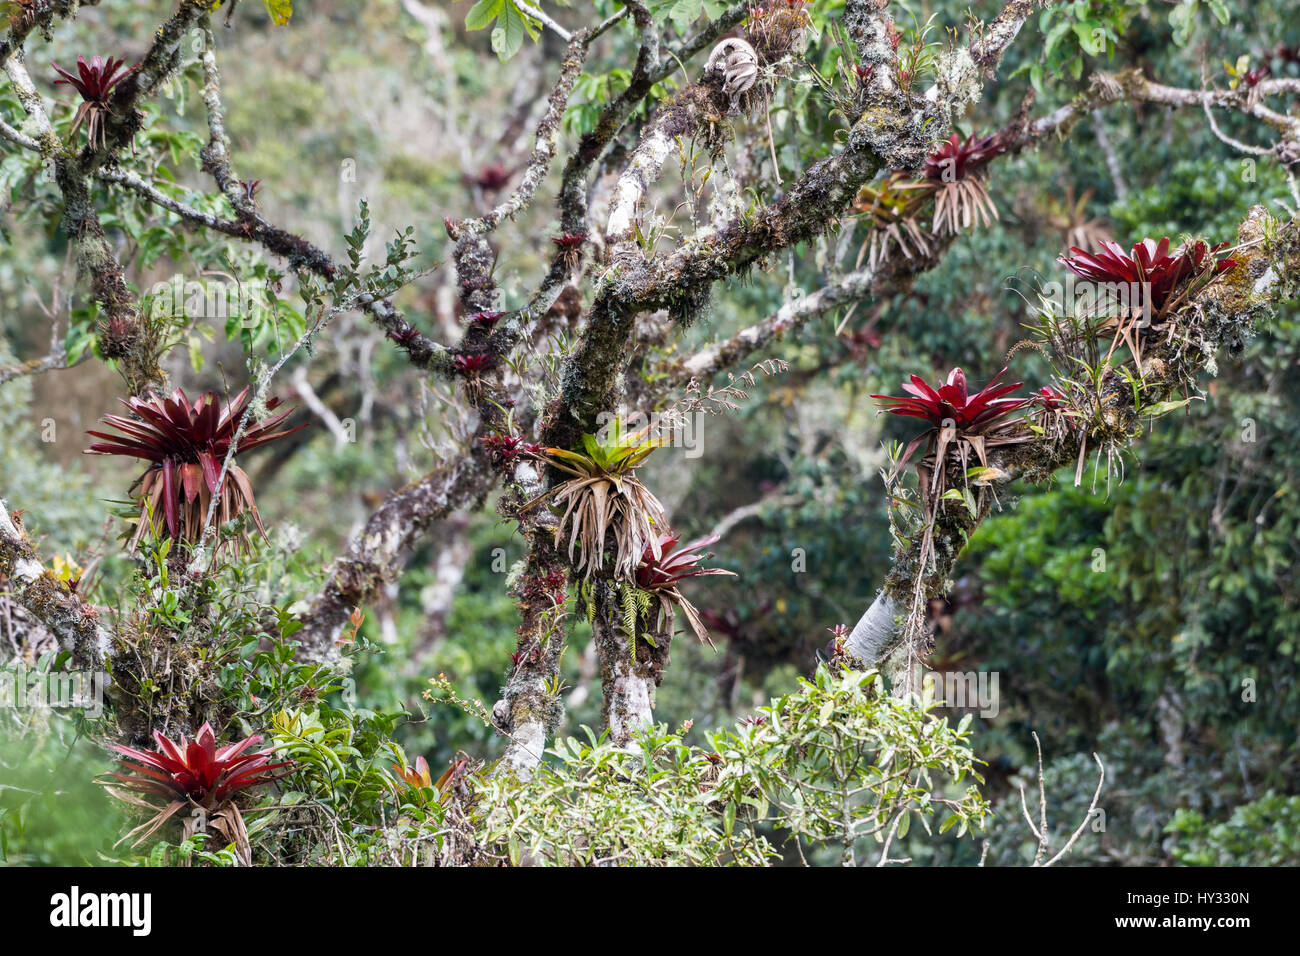 Colorful bromeliad and other epiphytic plants grow on trees in the Andean cloud forest. Peru. Stock Photo